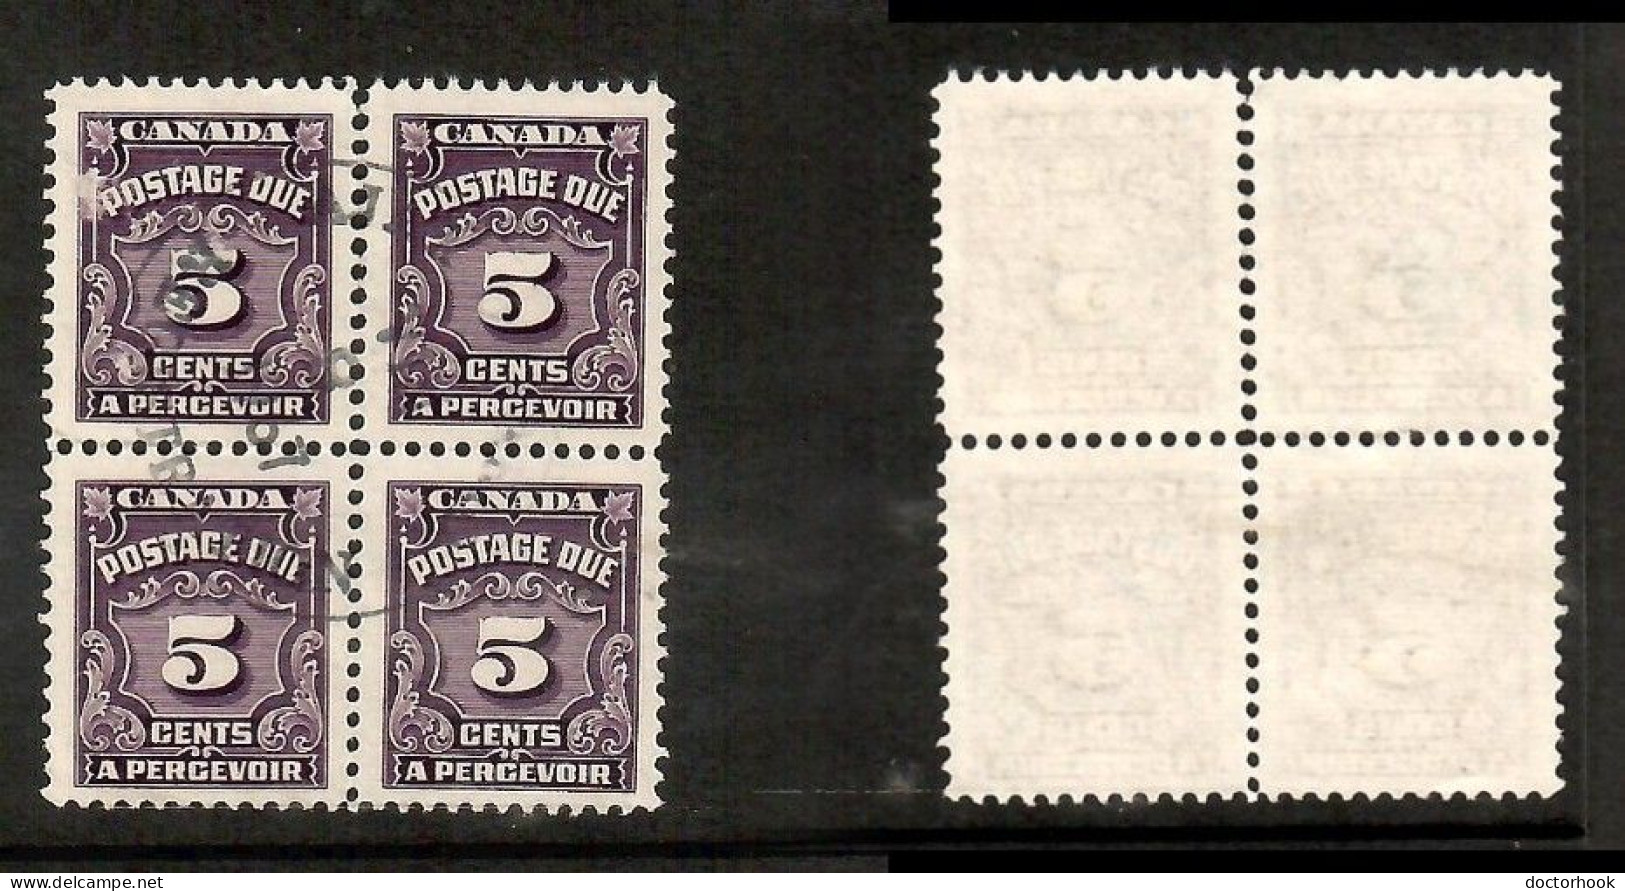 CANADA   Scott # J 18 USED BLOCK Of 4 (CONDITION AS PER SCAN) (CAN-202) - Blocks & Sheetlets